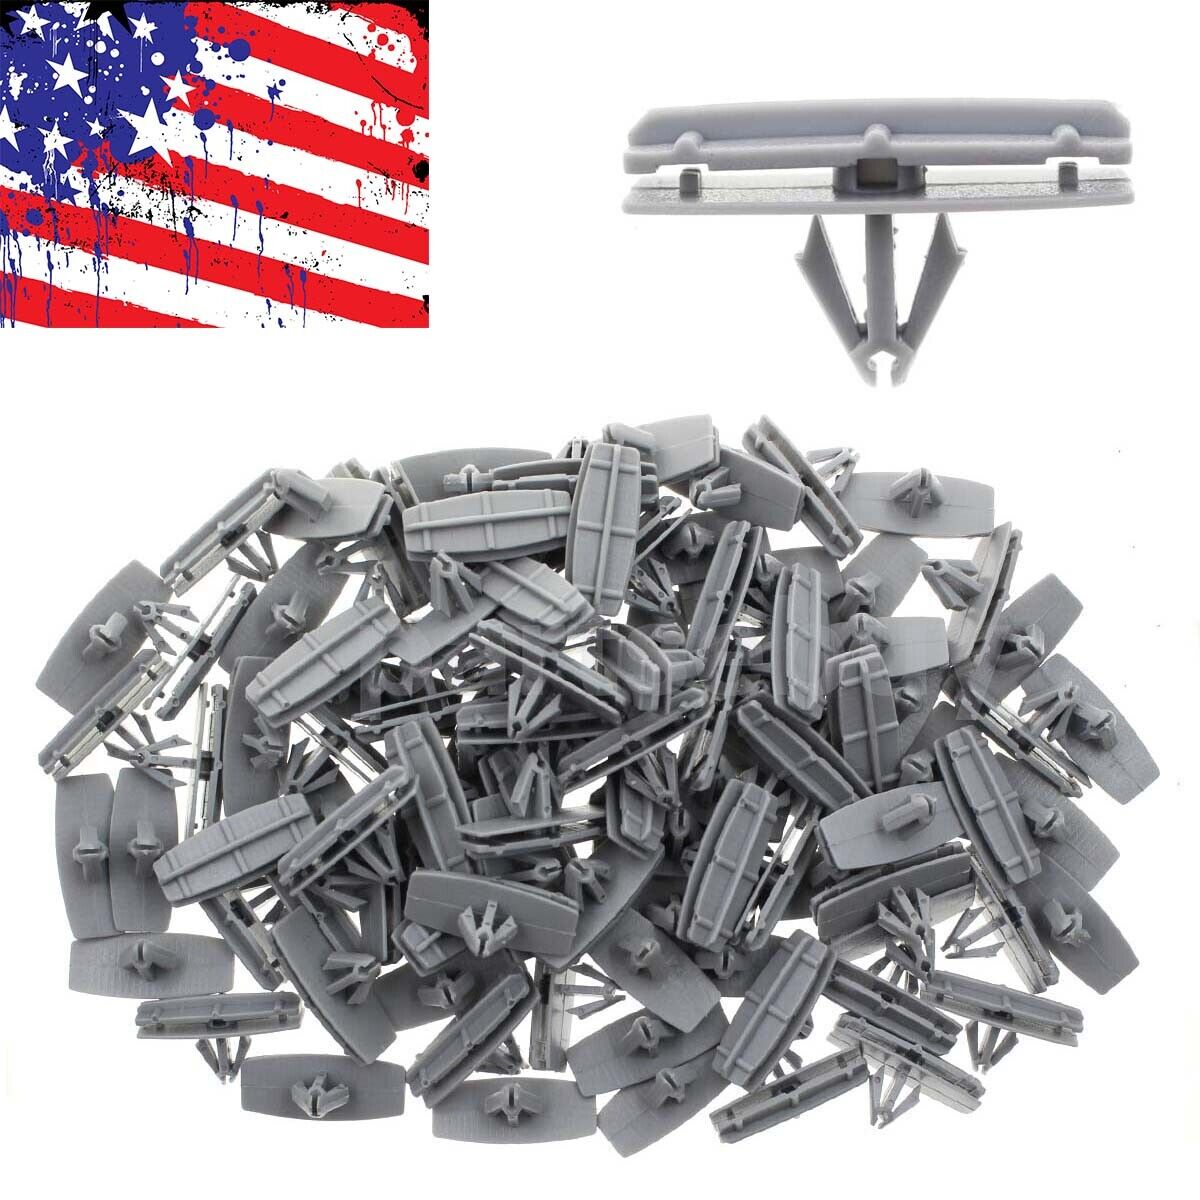 100pcs FENDER FLARE ARROW HEAD MOULDING CLIPS For Jeep Liberty 2002-2011